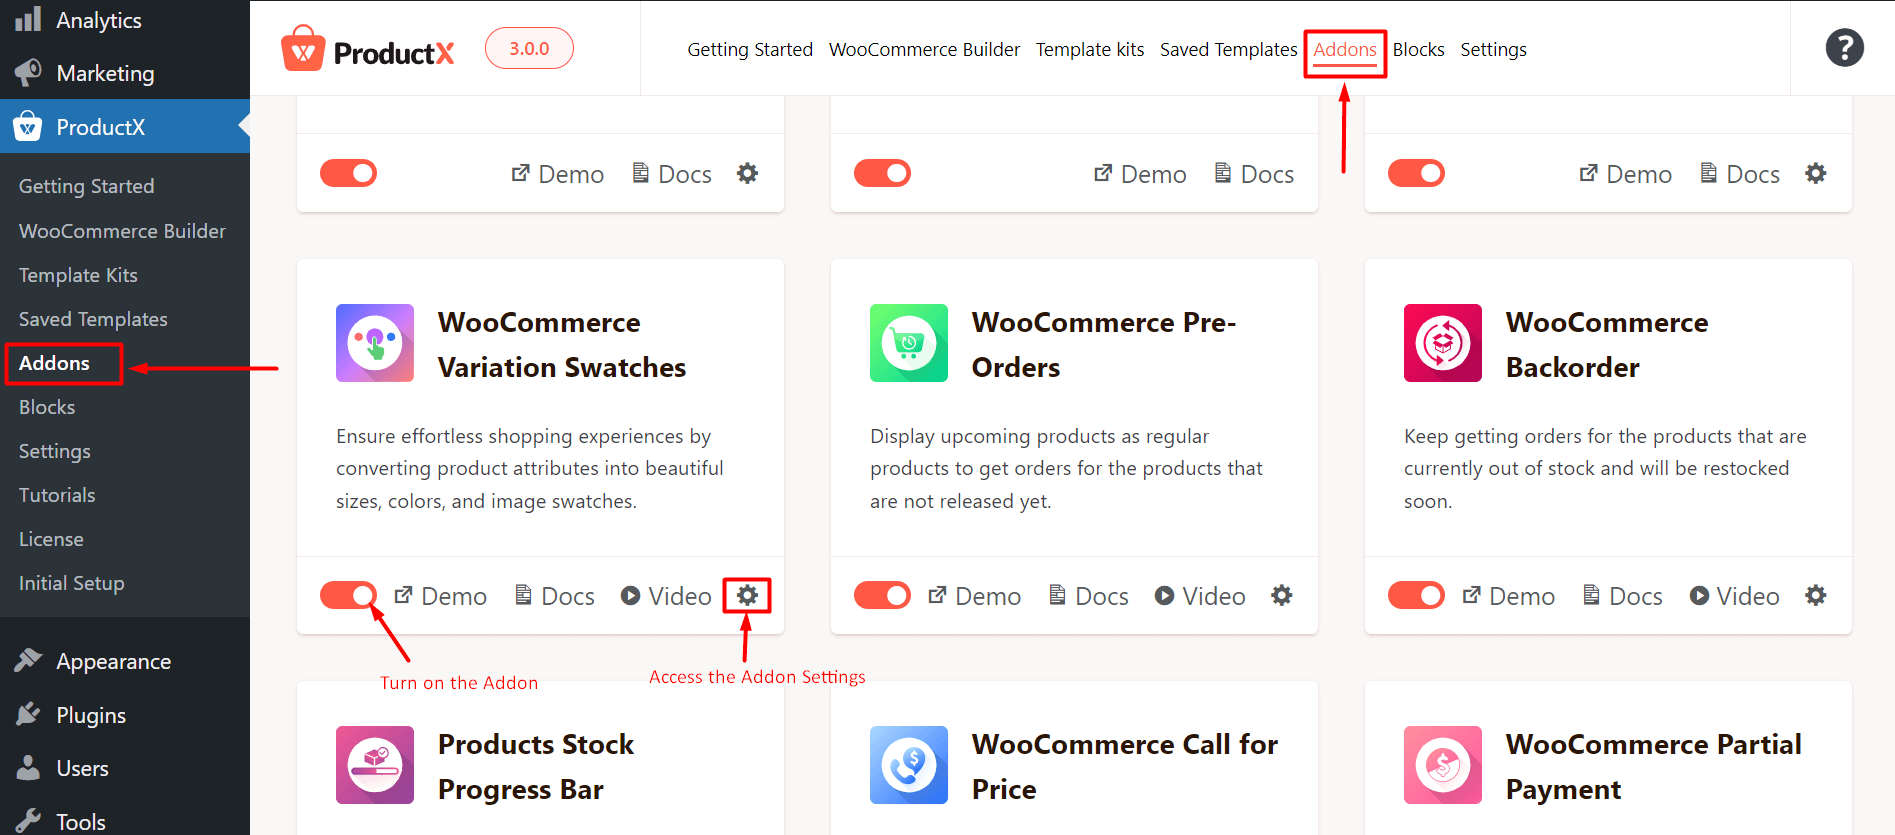 WooCommerce Variation Swatches - Turning the Addon ON